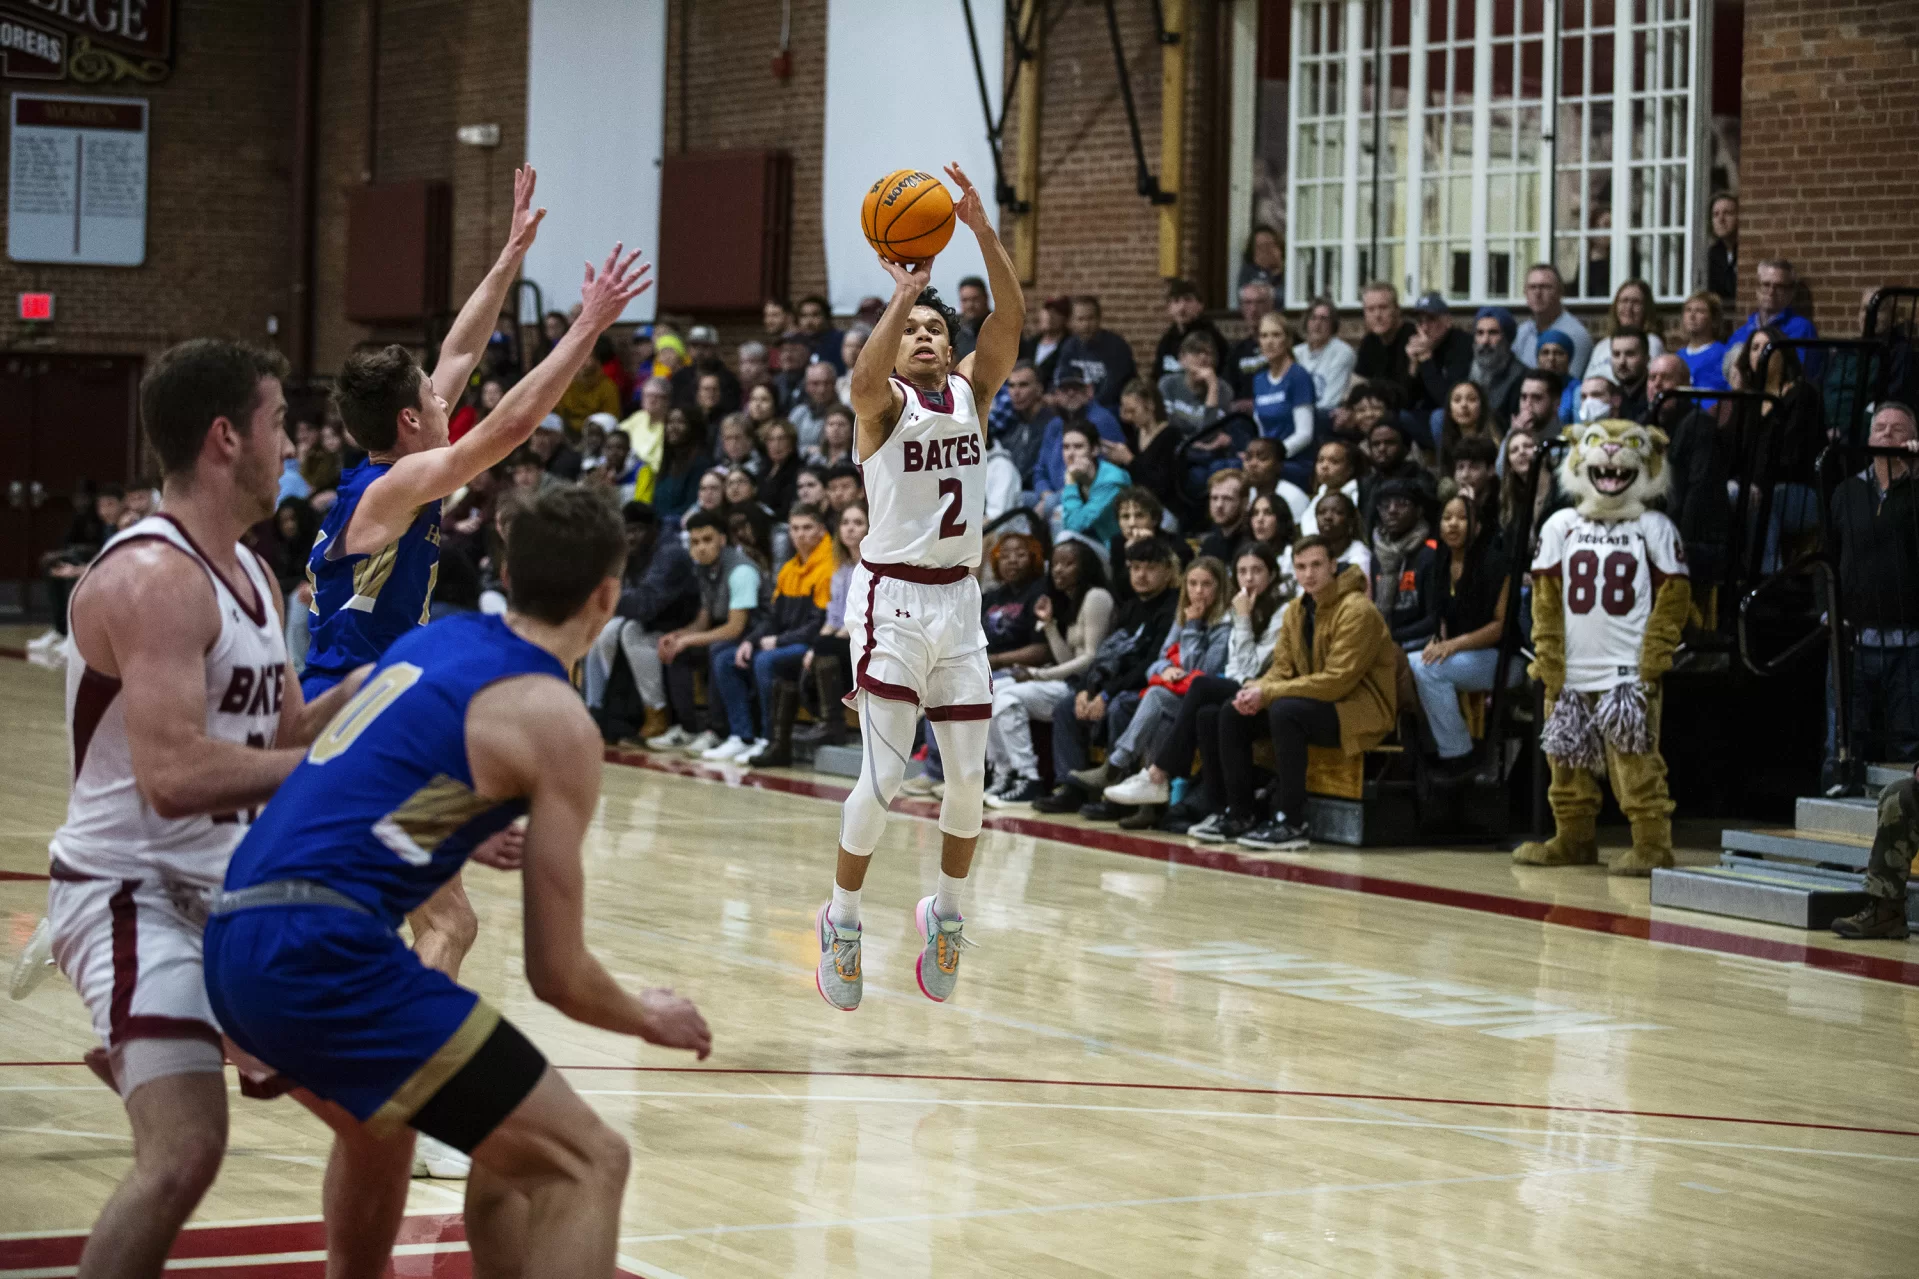 Bates loses 64-67 to Hamilton at Bates on January 13, 2023. (Theophil Syslo | Bates College)